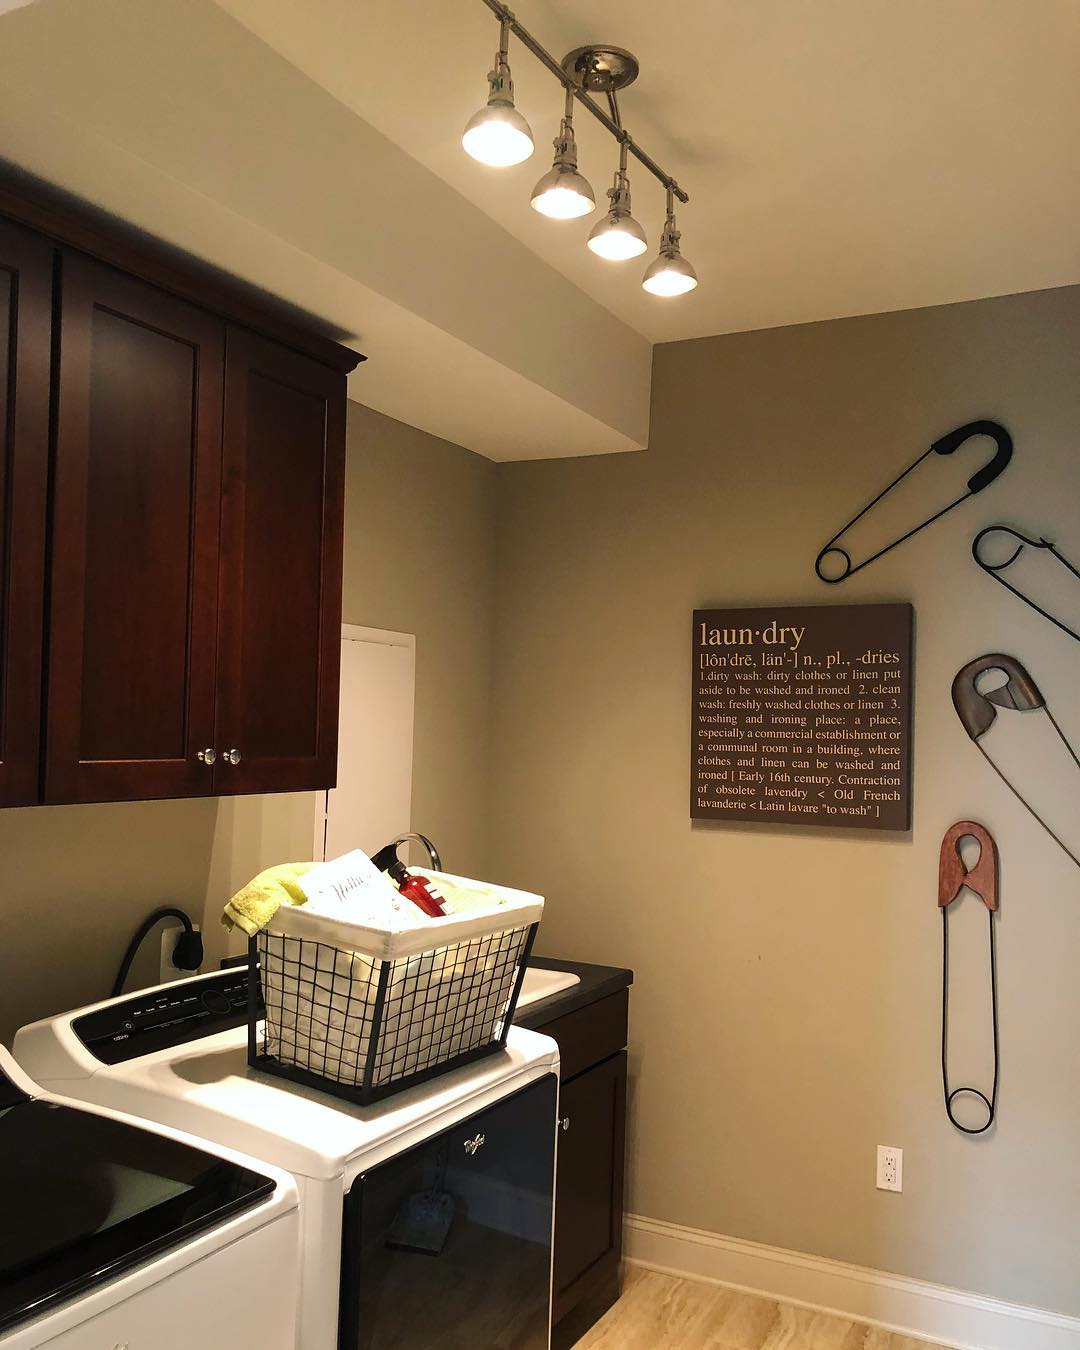 New light fixture for a quick laundry room facelift